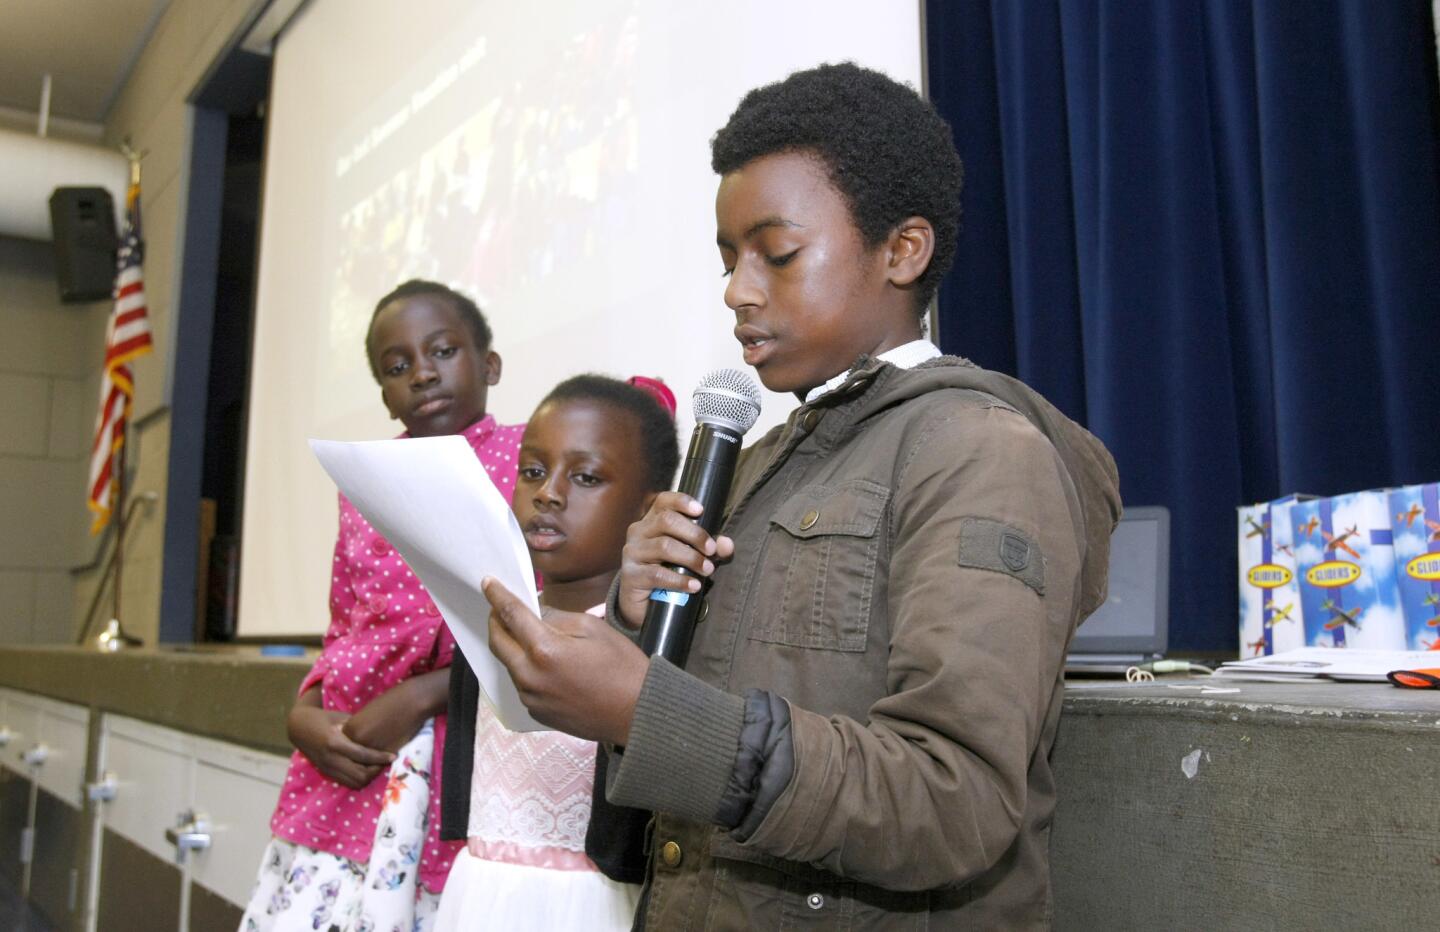 With his sisters fifth grader Ashley Otieno, left, and second grader Nicole Otieno, center, next to him, Palm Crest Elementary School sixth grader Elijah Otieno, right, speaks at school assembly about the family's international philanthropy clothing and school supplies collection, at the La Ca–ada Flintridge school on Friday, March 24, 2017. The three children gave a presentation about their parents' country of origin, Kenya, and also spoke about their effort to collect used clothing and school supplies to take back to Kenya. This will be their second year collecting items for Kenyan children.